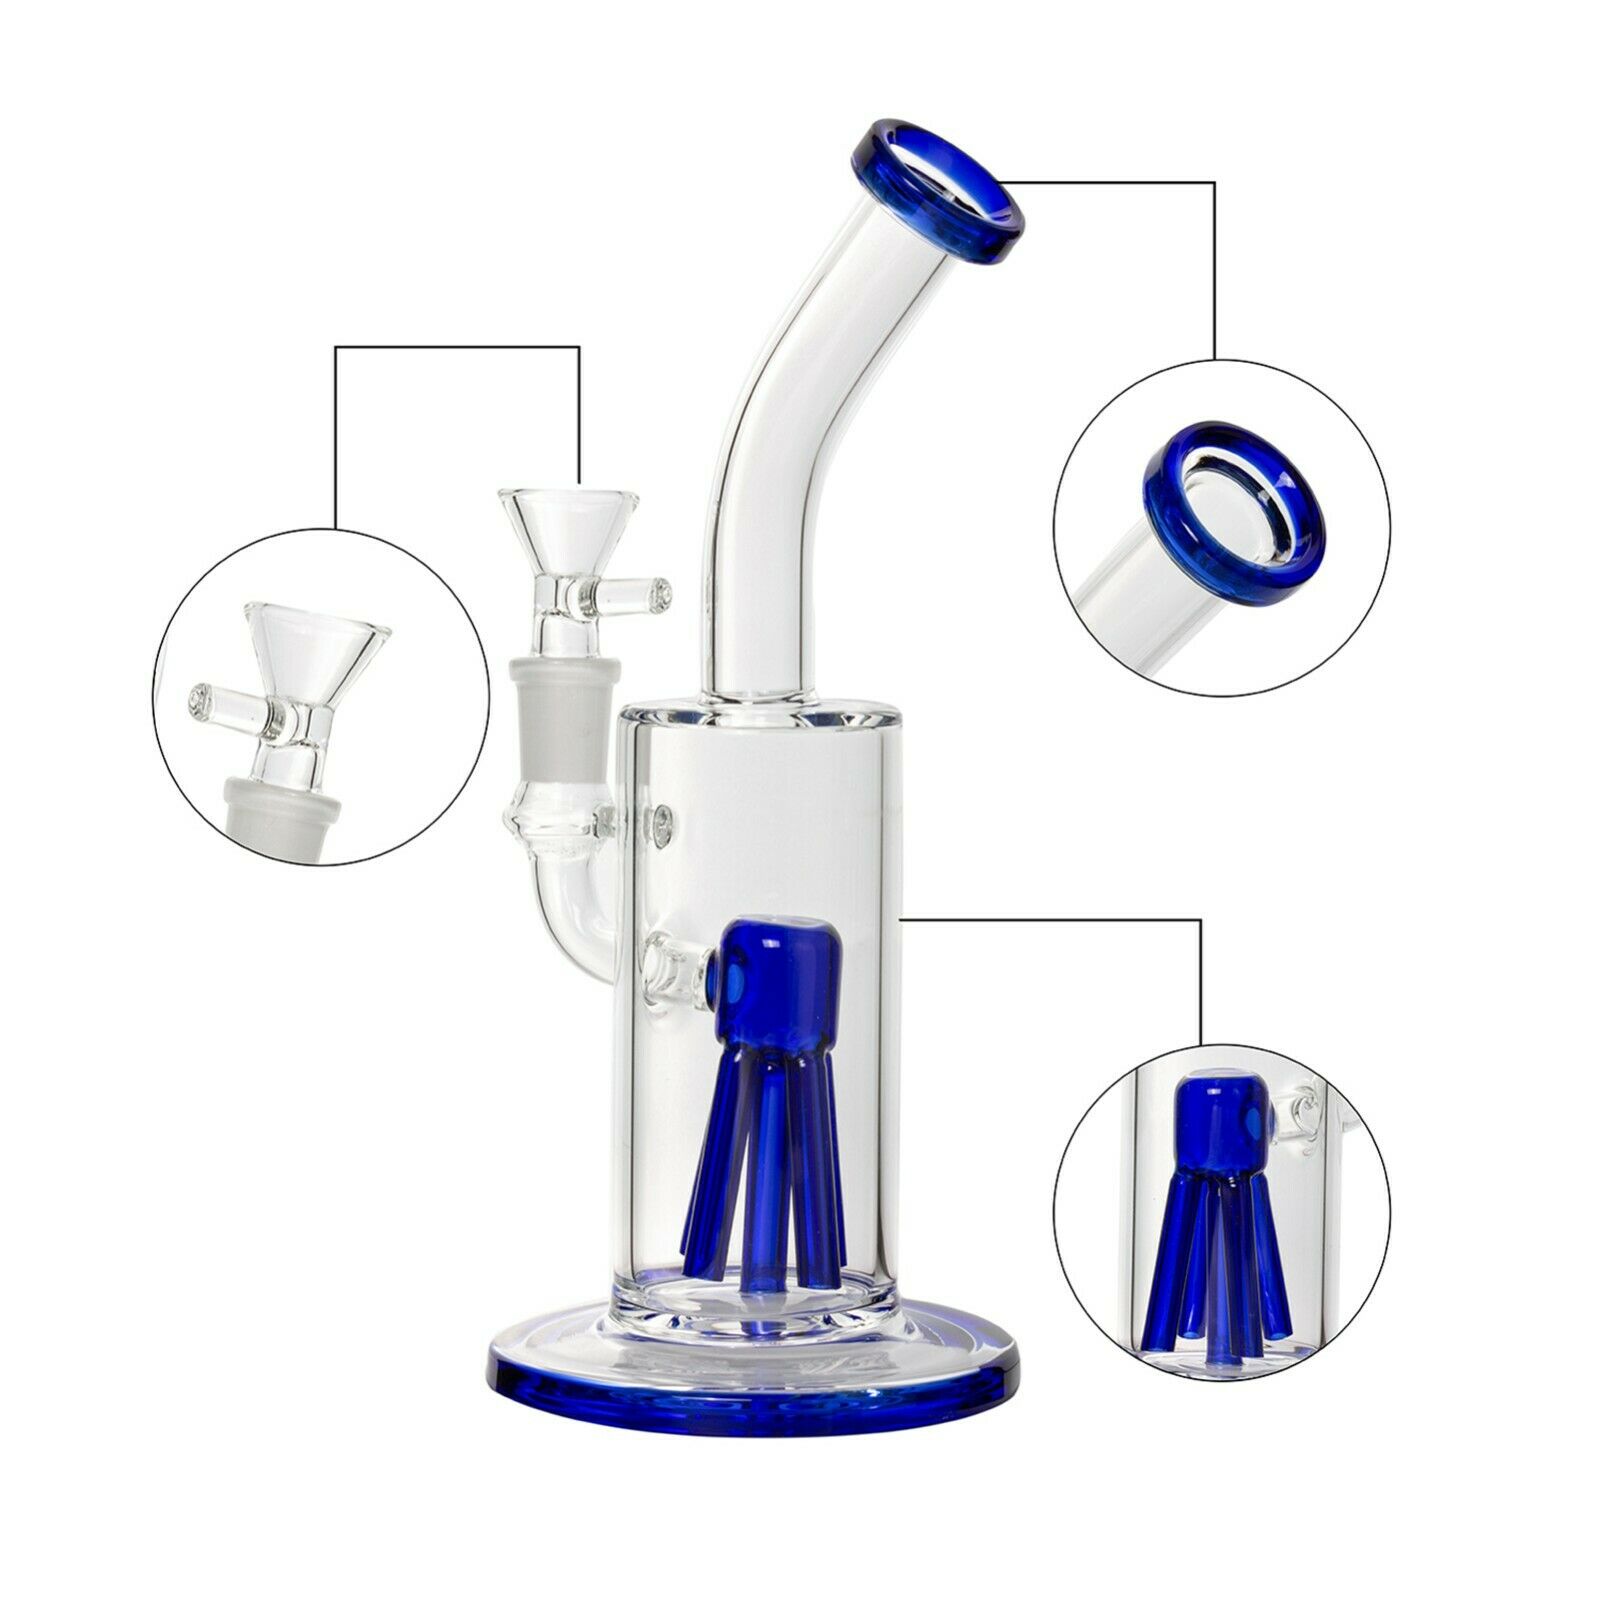 China Custom handmade dab rigs bubbler glass pipes bong smoking  Manufacturer and Supplier